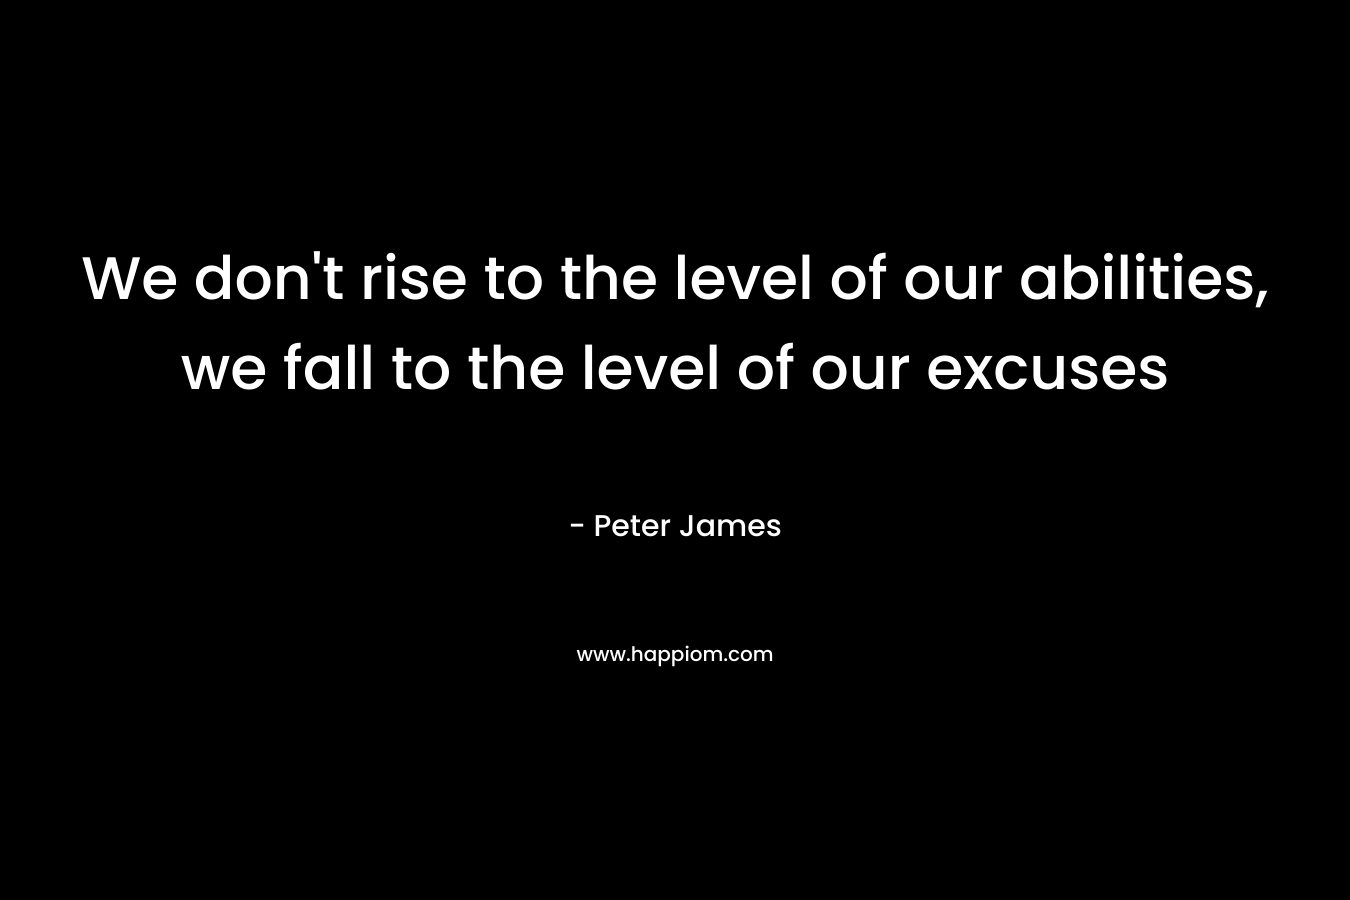 We don't rise to the level of our abilities, we fall to the level of our excuses